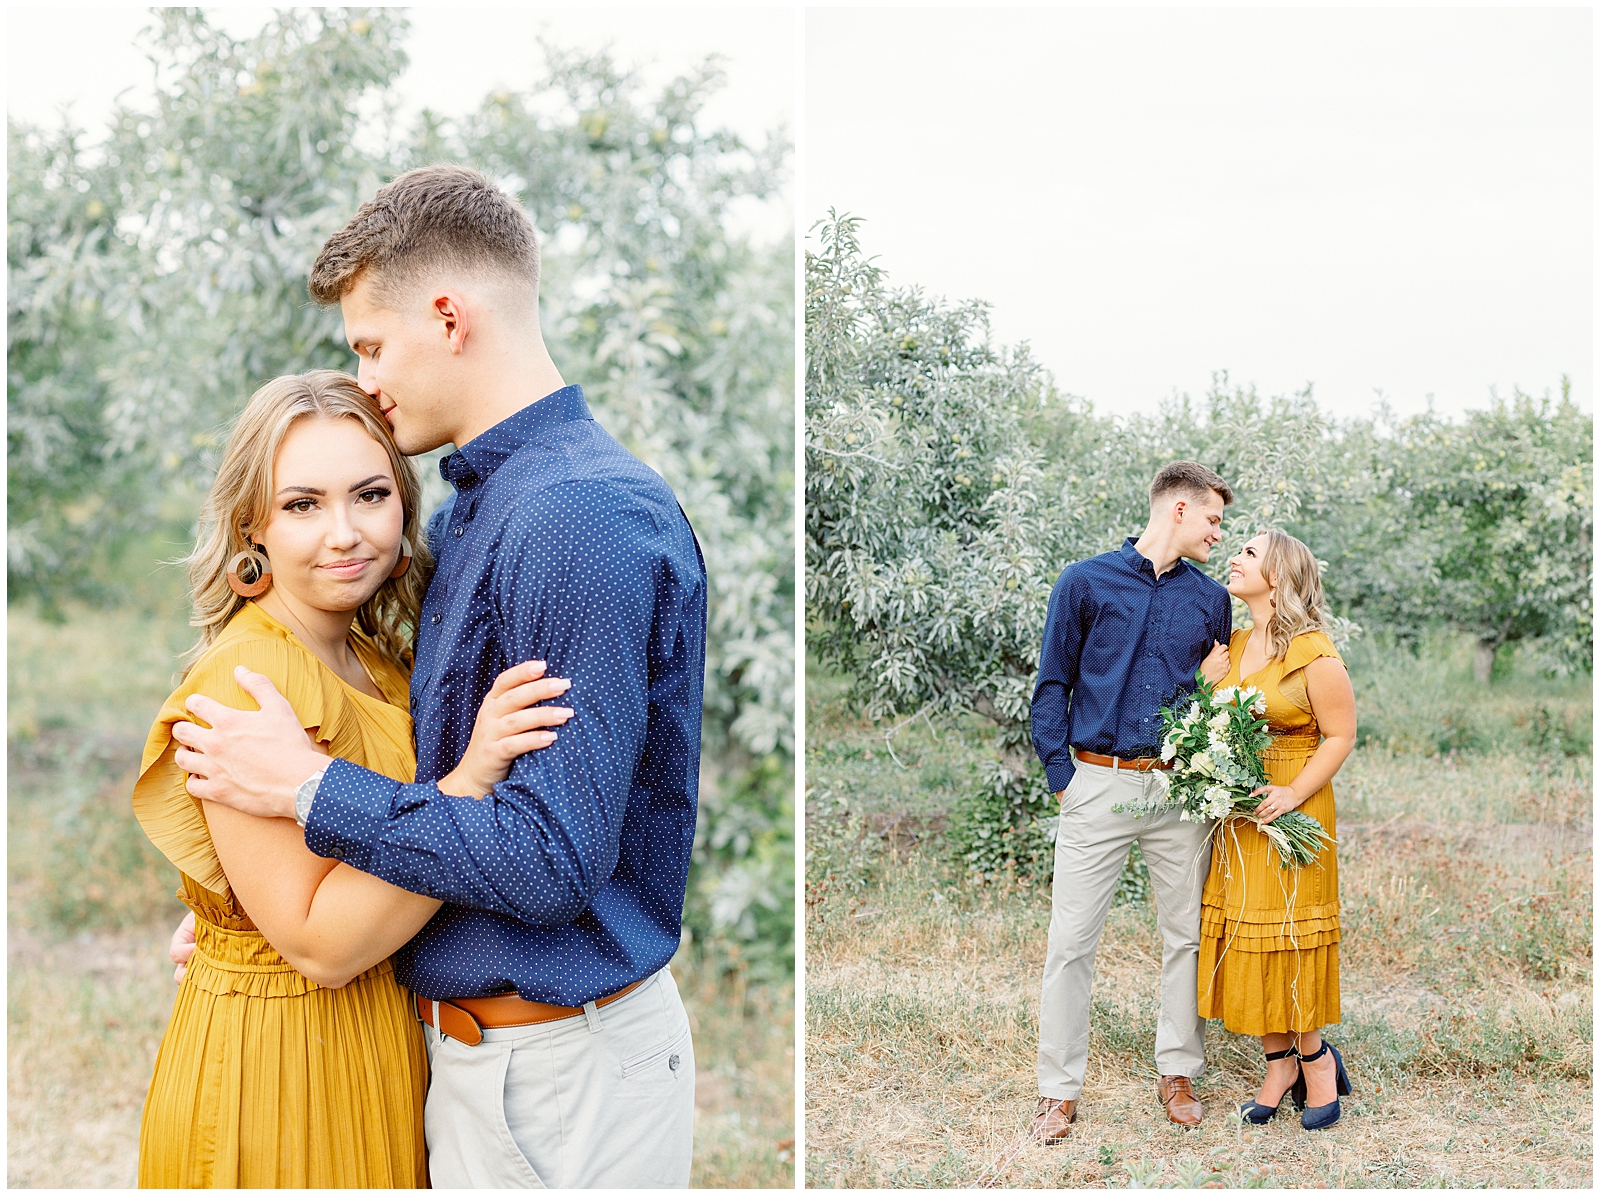 Summer Orchard Engagement Session in Navy and Mustard